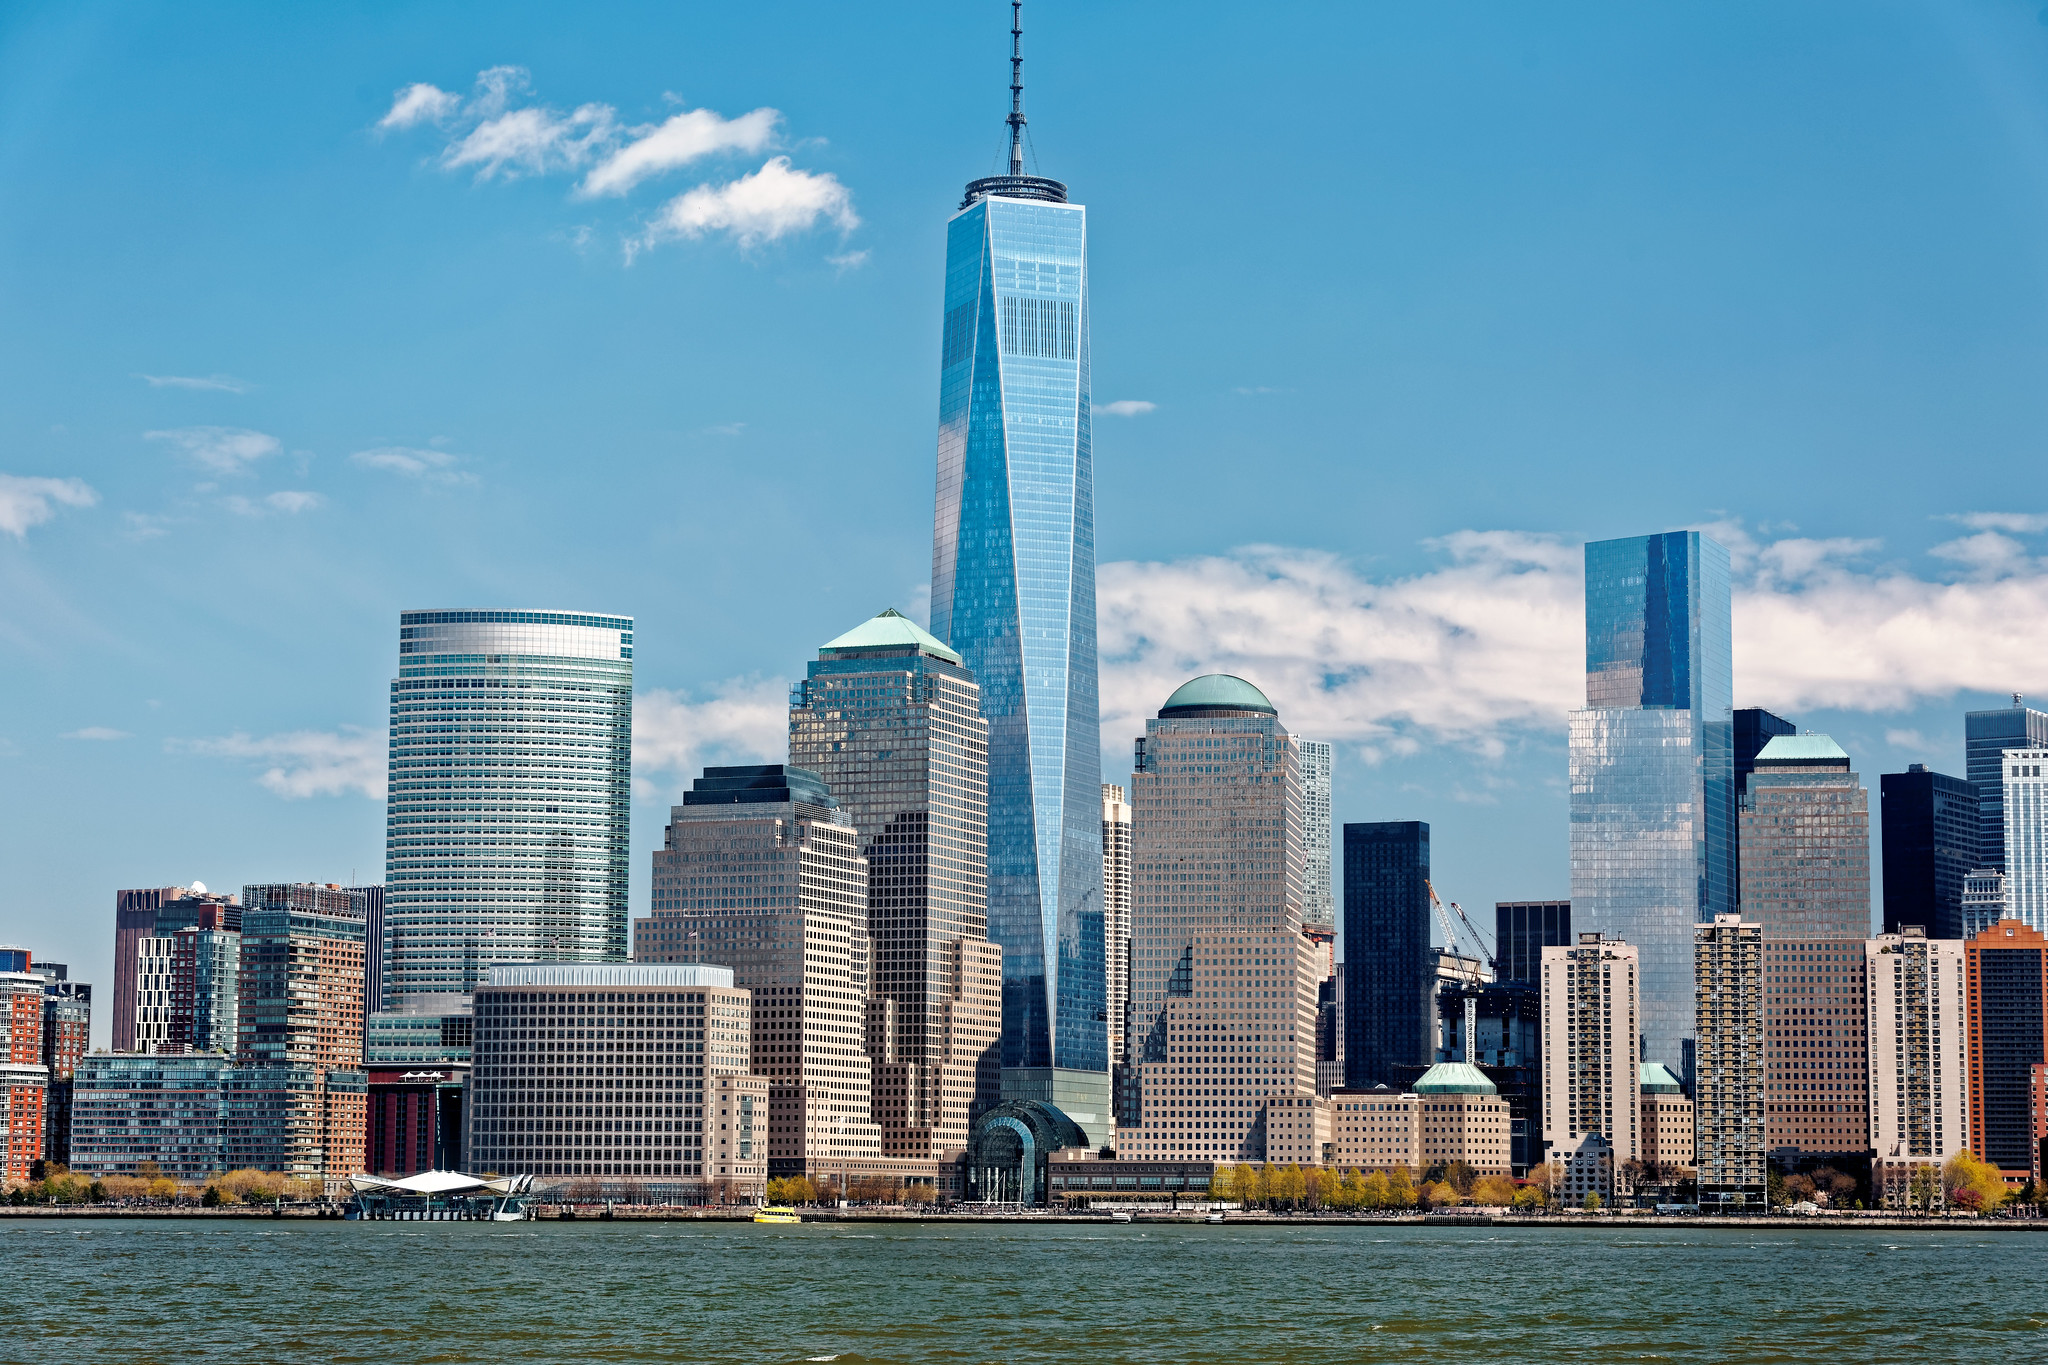 <p>A stunning skyscraper in the heart of New York City, the One World Trade Center is recognized as the <strong>tallest building in the U.S</strong>. It was built on the site of the former World Trade Center.</p><p>Tourists enjoy views of the world-renowned skyline unlike any other in the city.</p><p><strong>Features:</strong> Observatory, fine dining, shopping, events</p><p>Michael Vadon, Flickr</p>